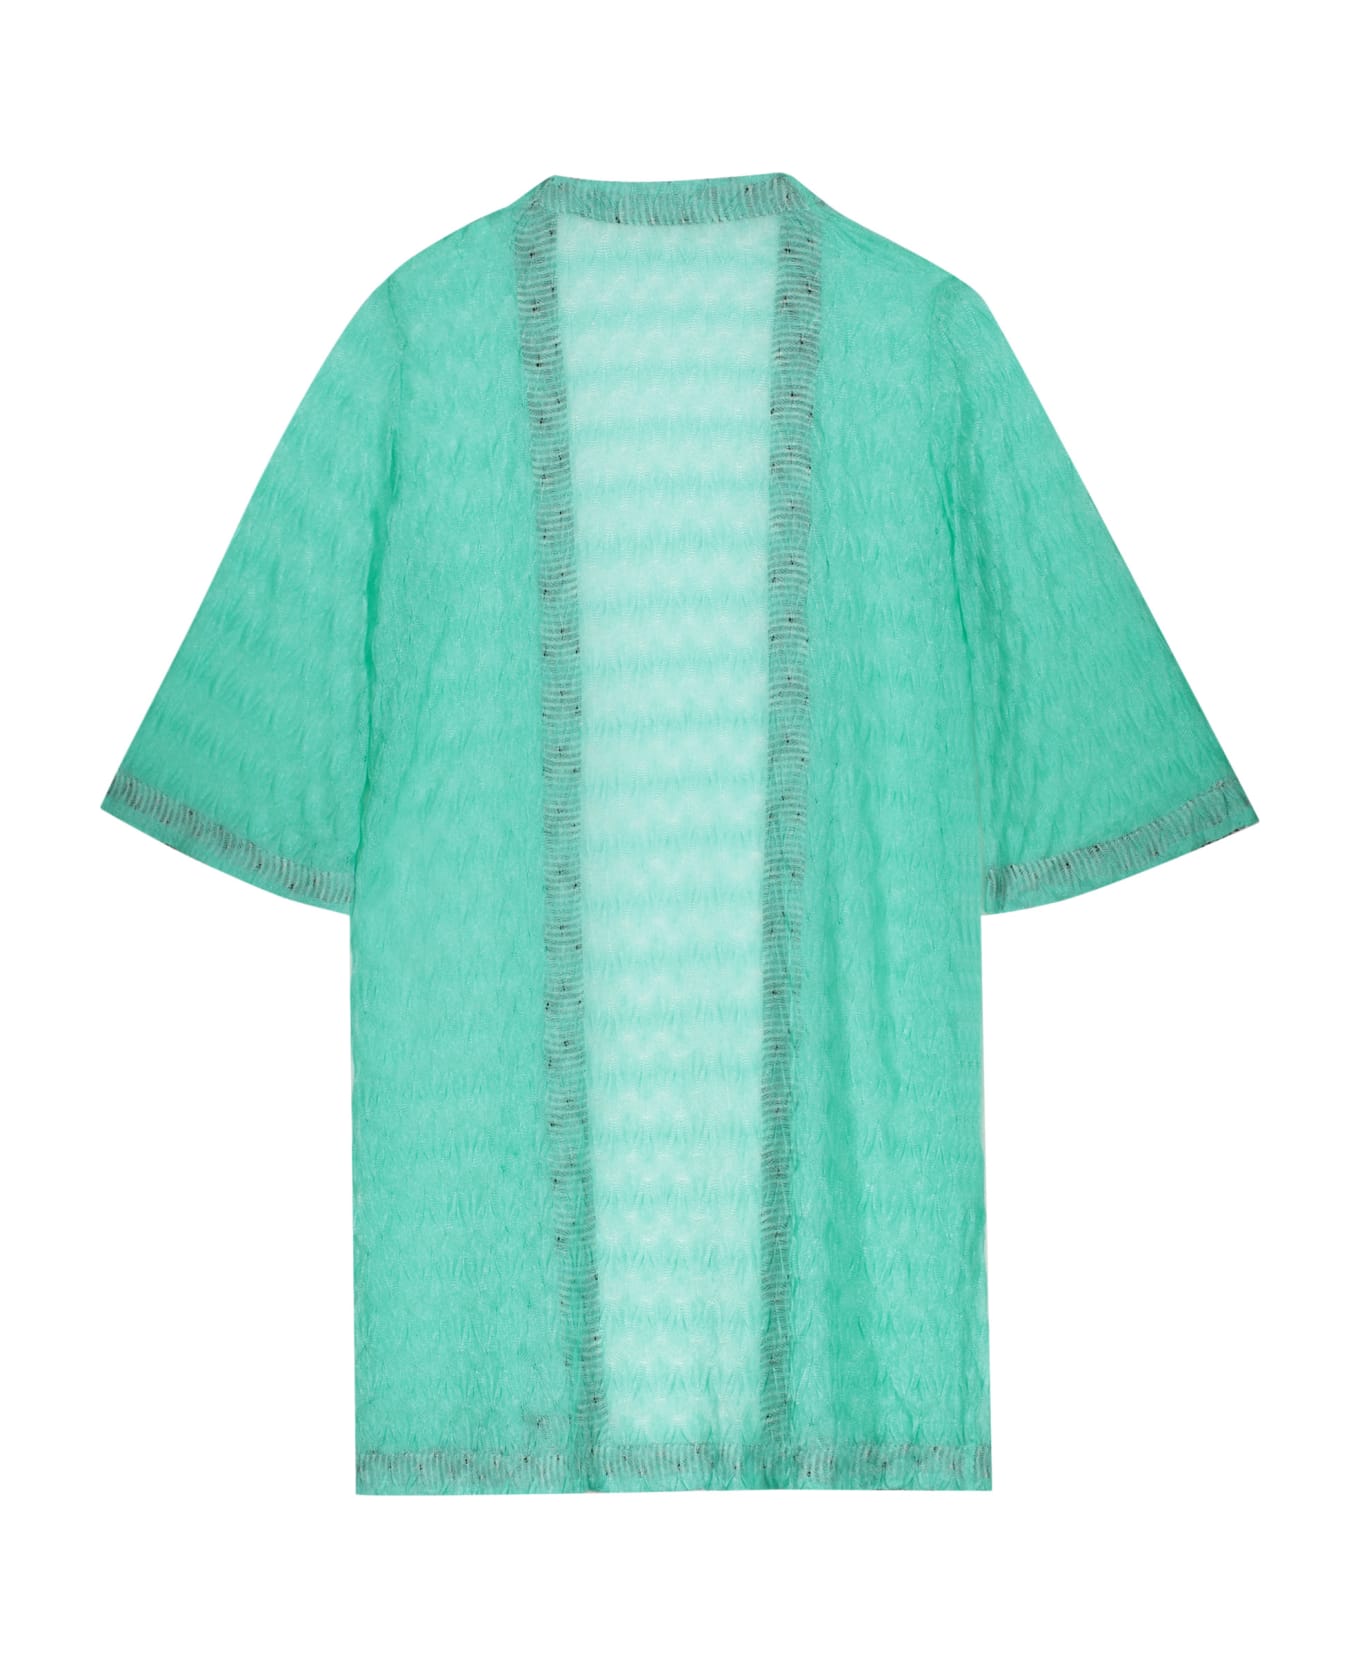 M Missoni Knitted Cover-up Dress - green